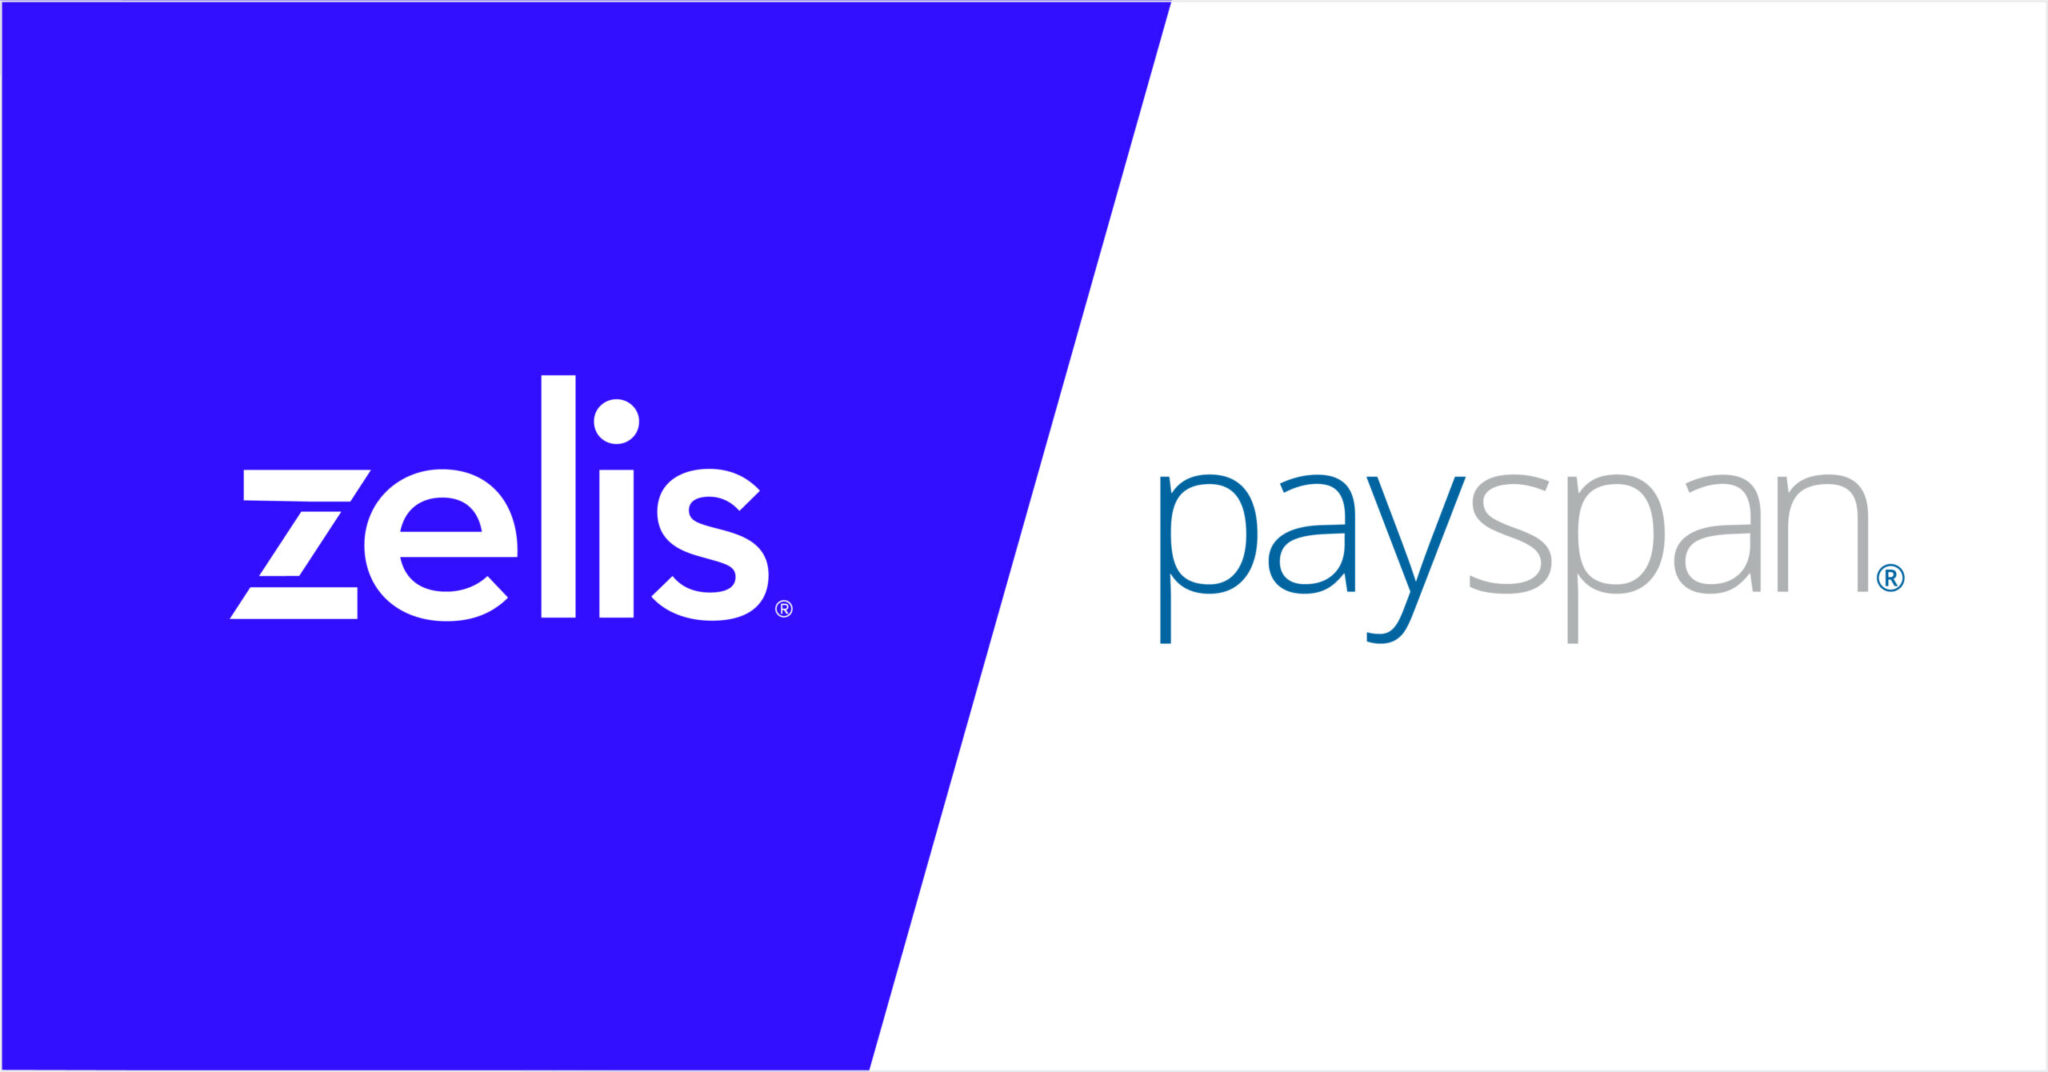 Zelis Completes Acquisition of Payspan